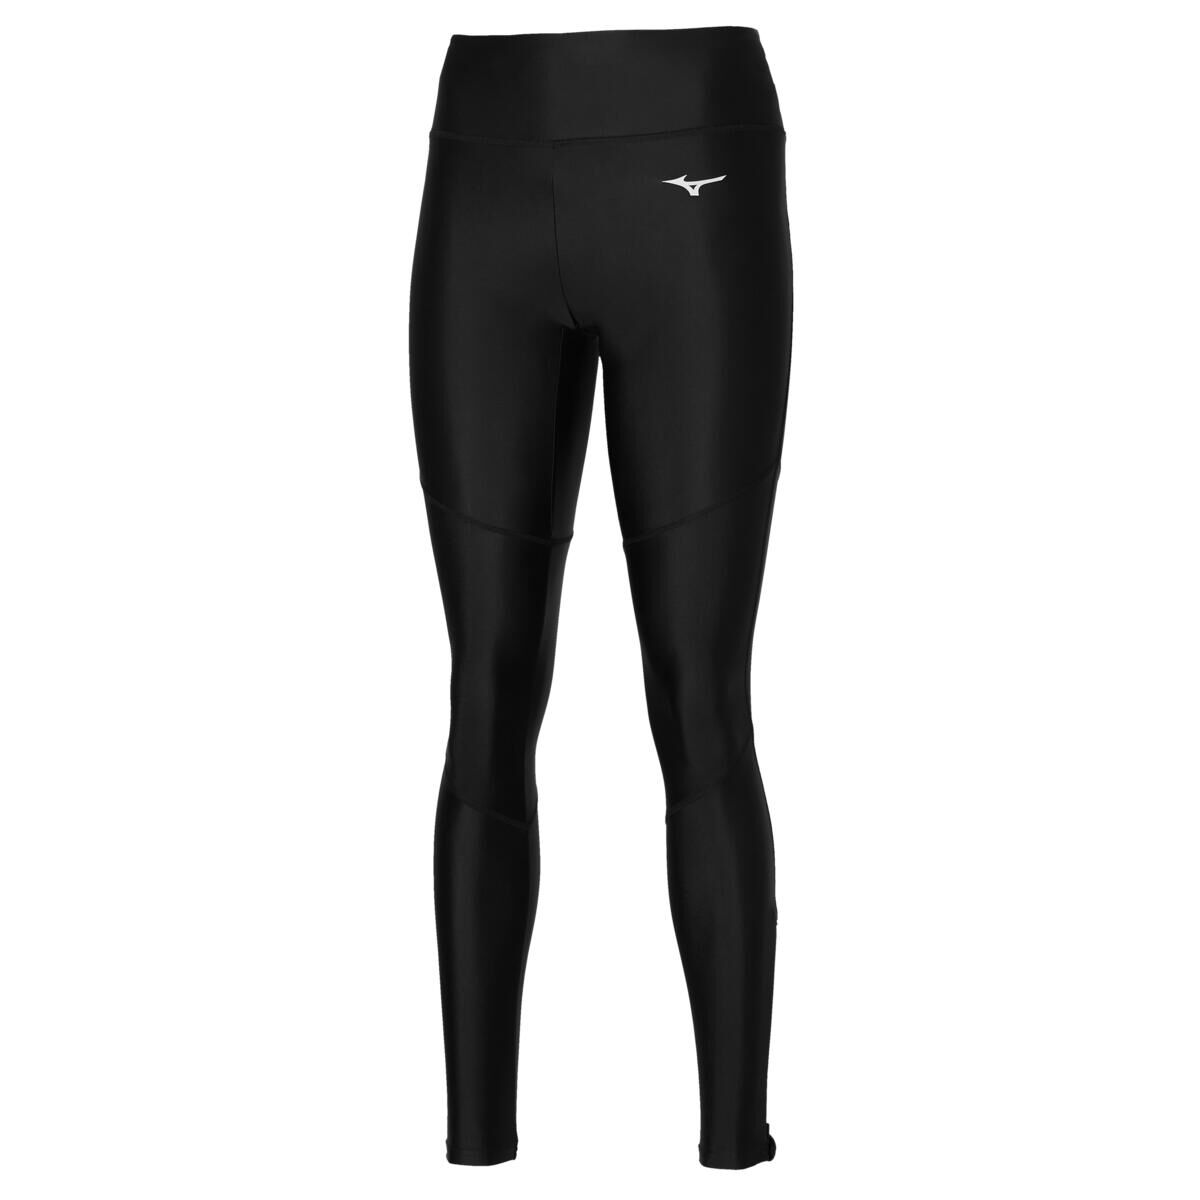 Extra Strong Compression Running Capri with Tummy Control Black